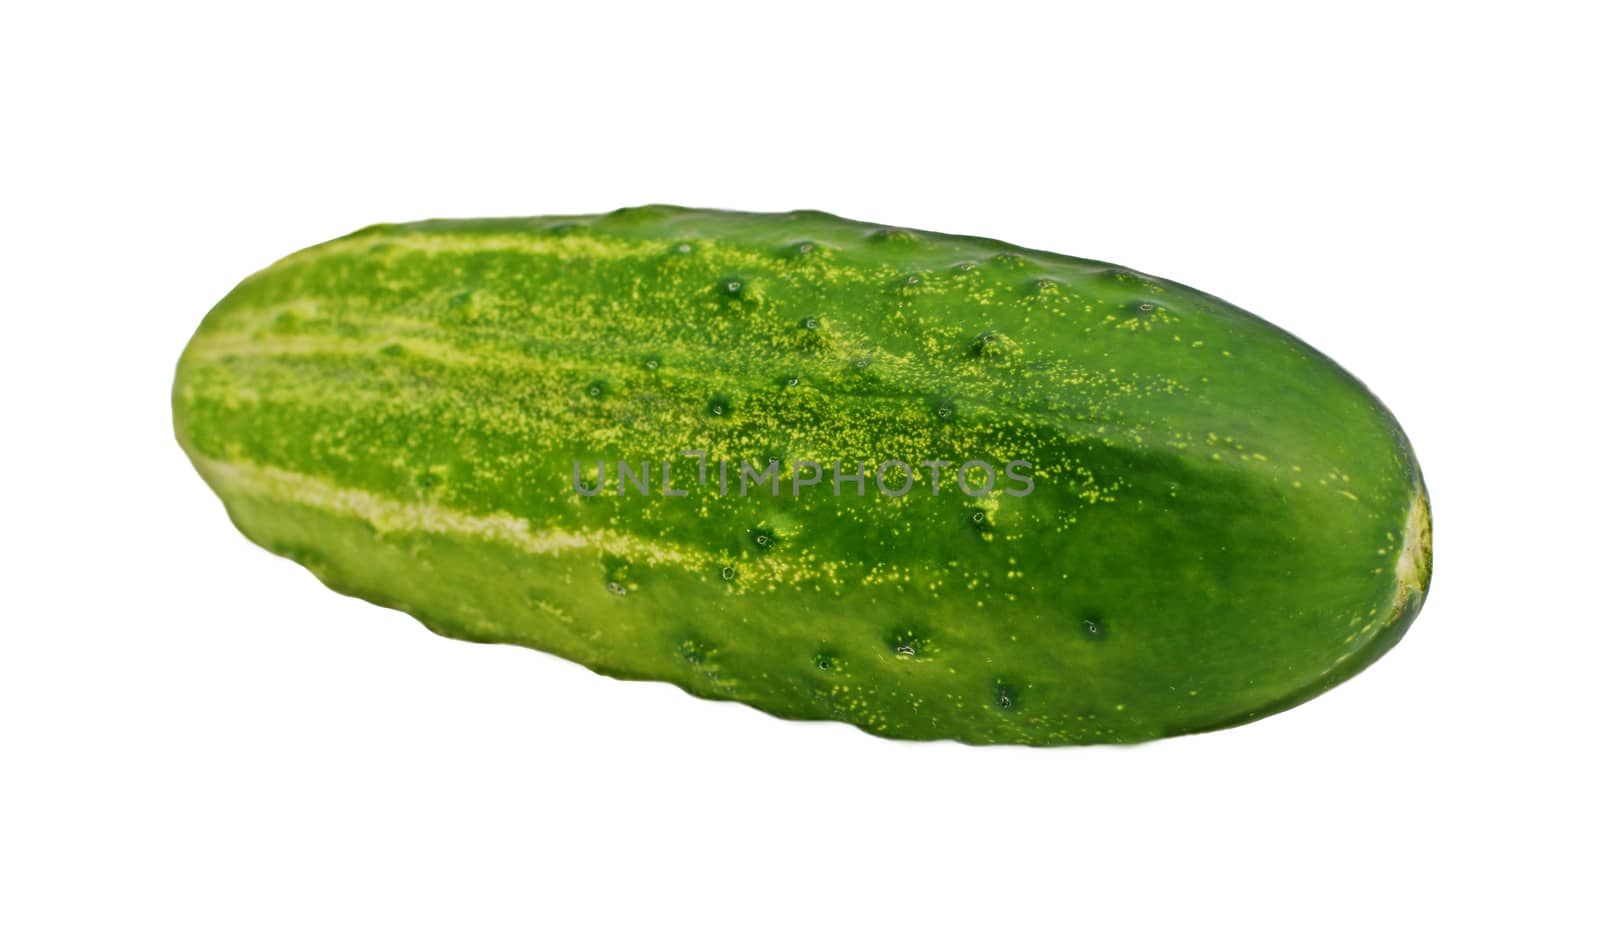 Organic cucumber on a white background.